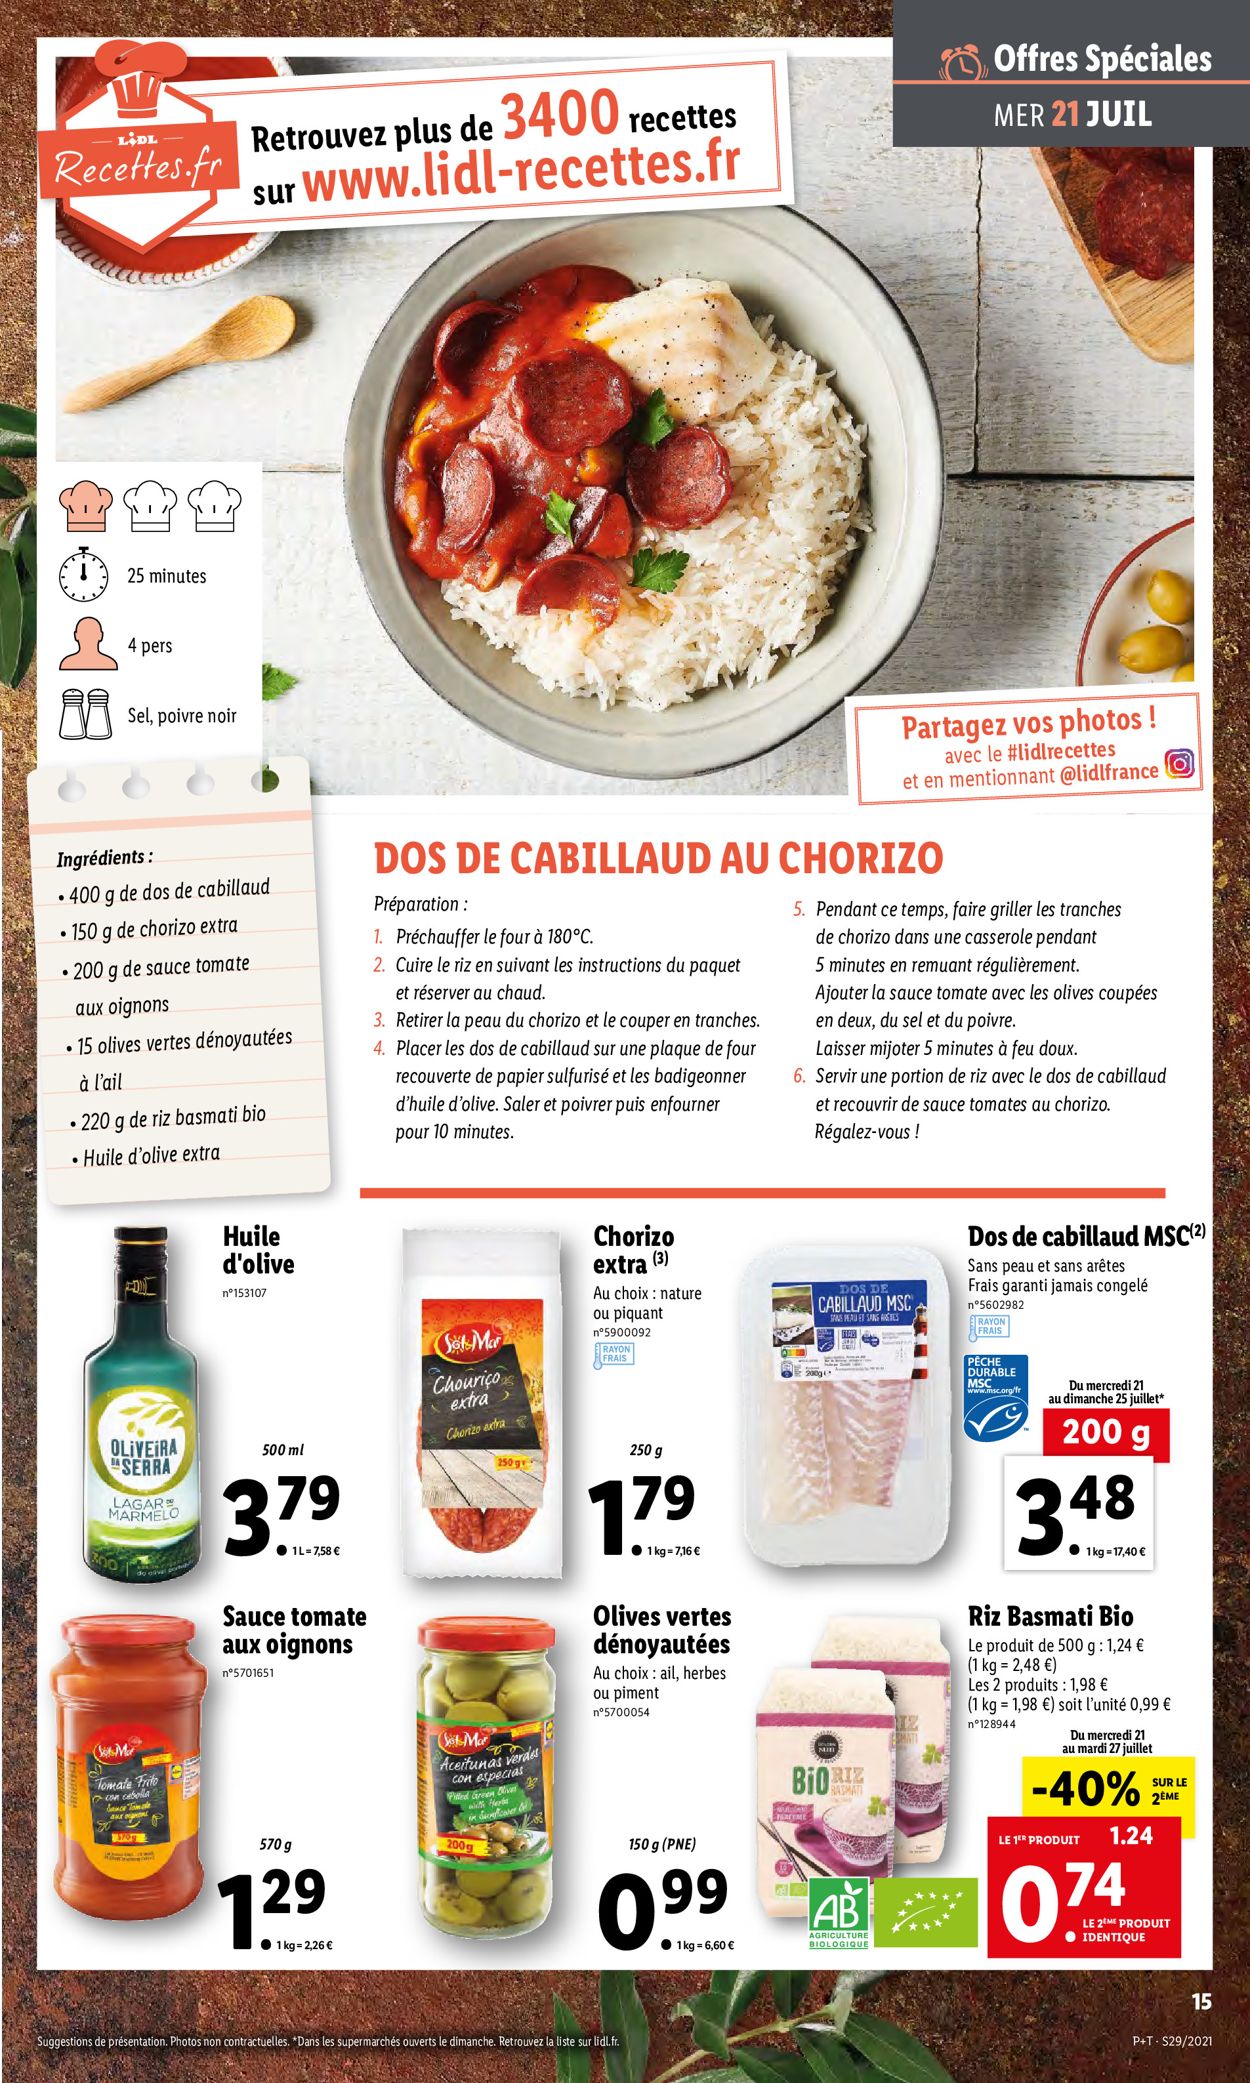 Lidl Catalogue - 21.07-27.07.2021 (Page 19)